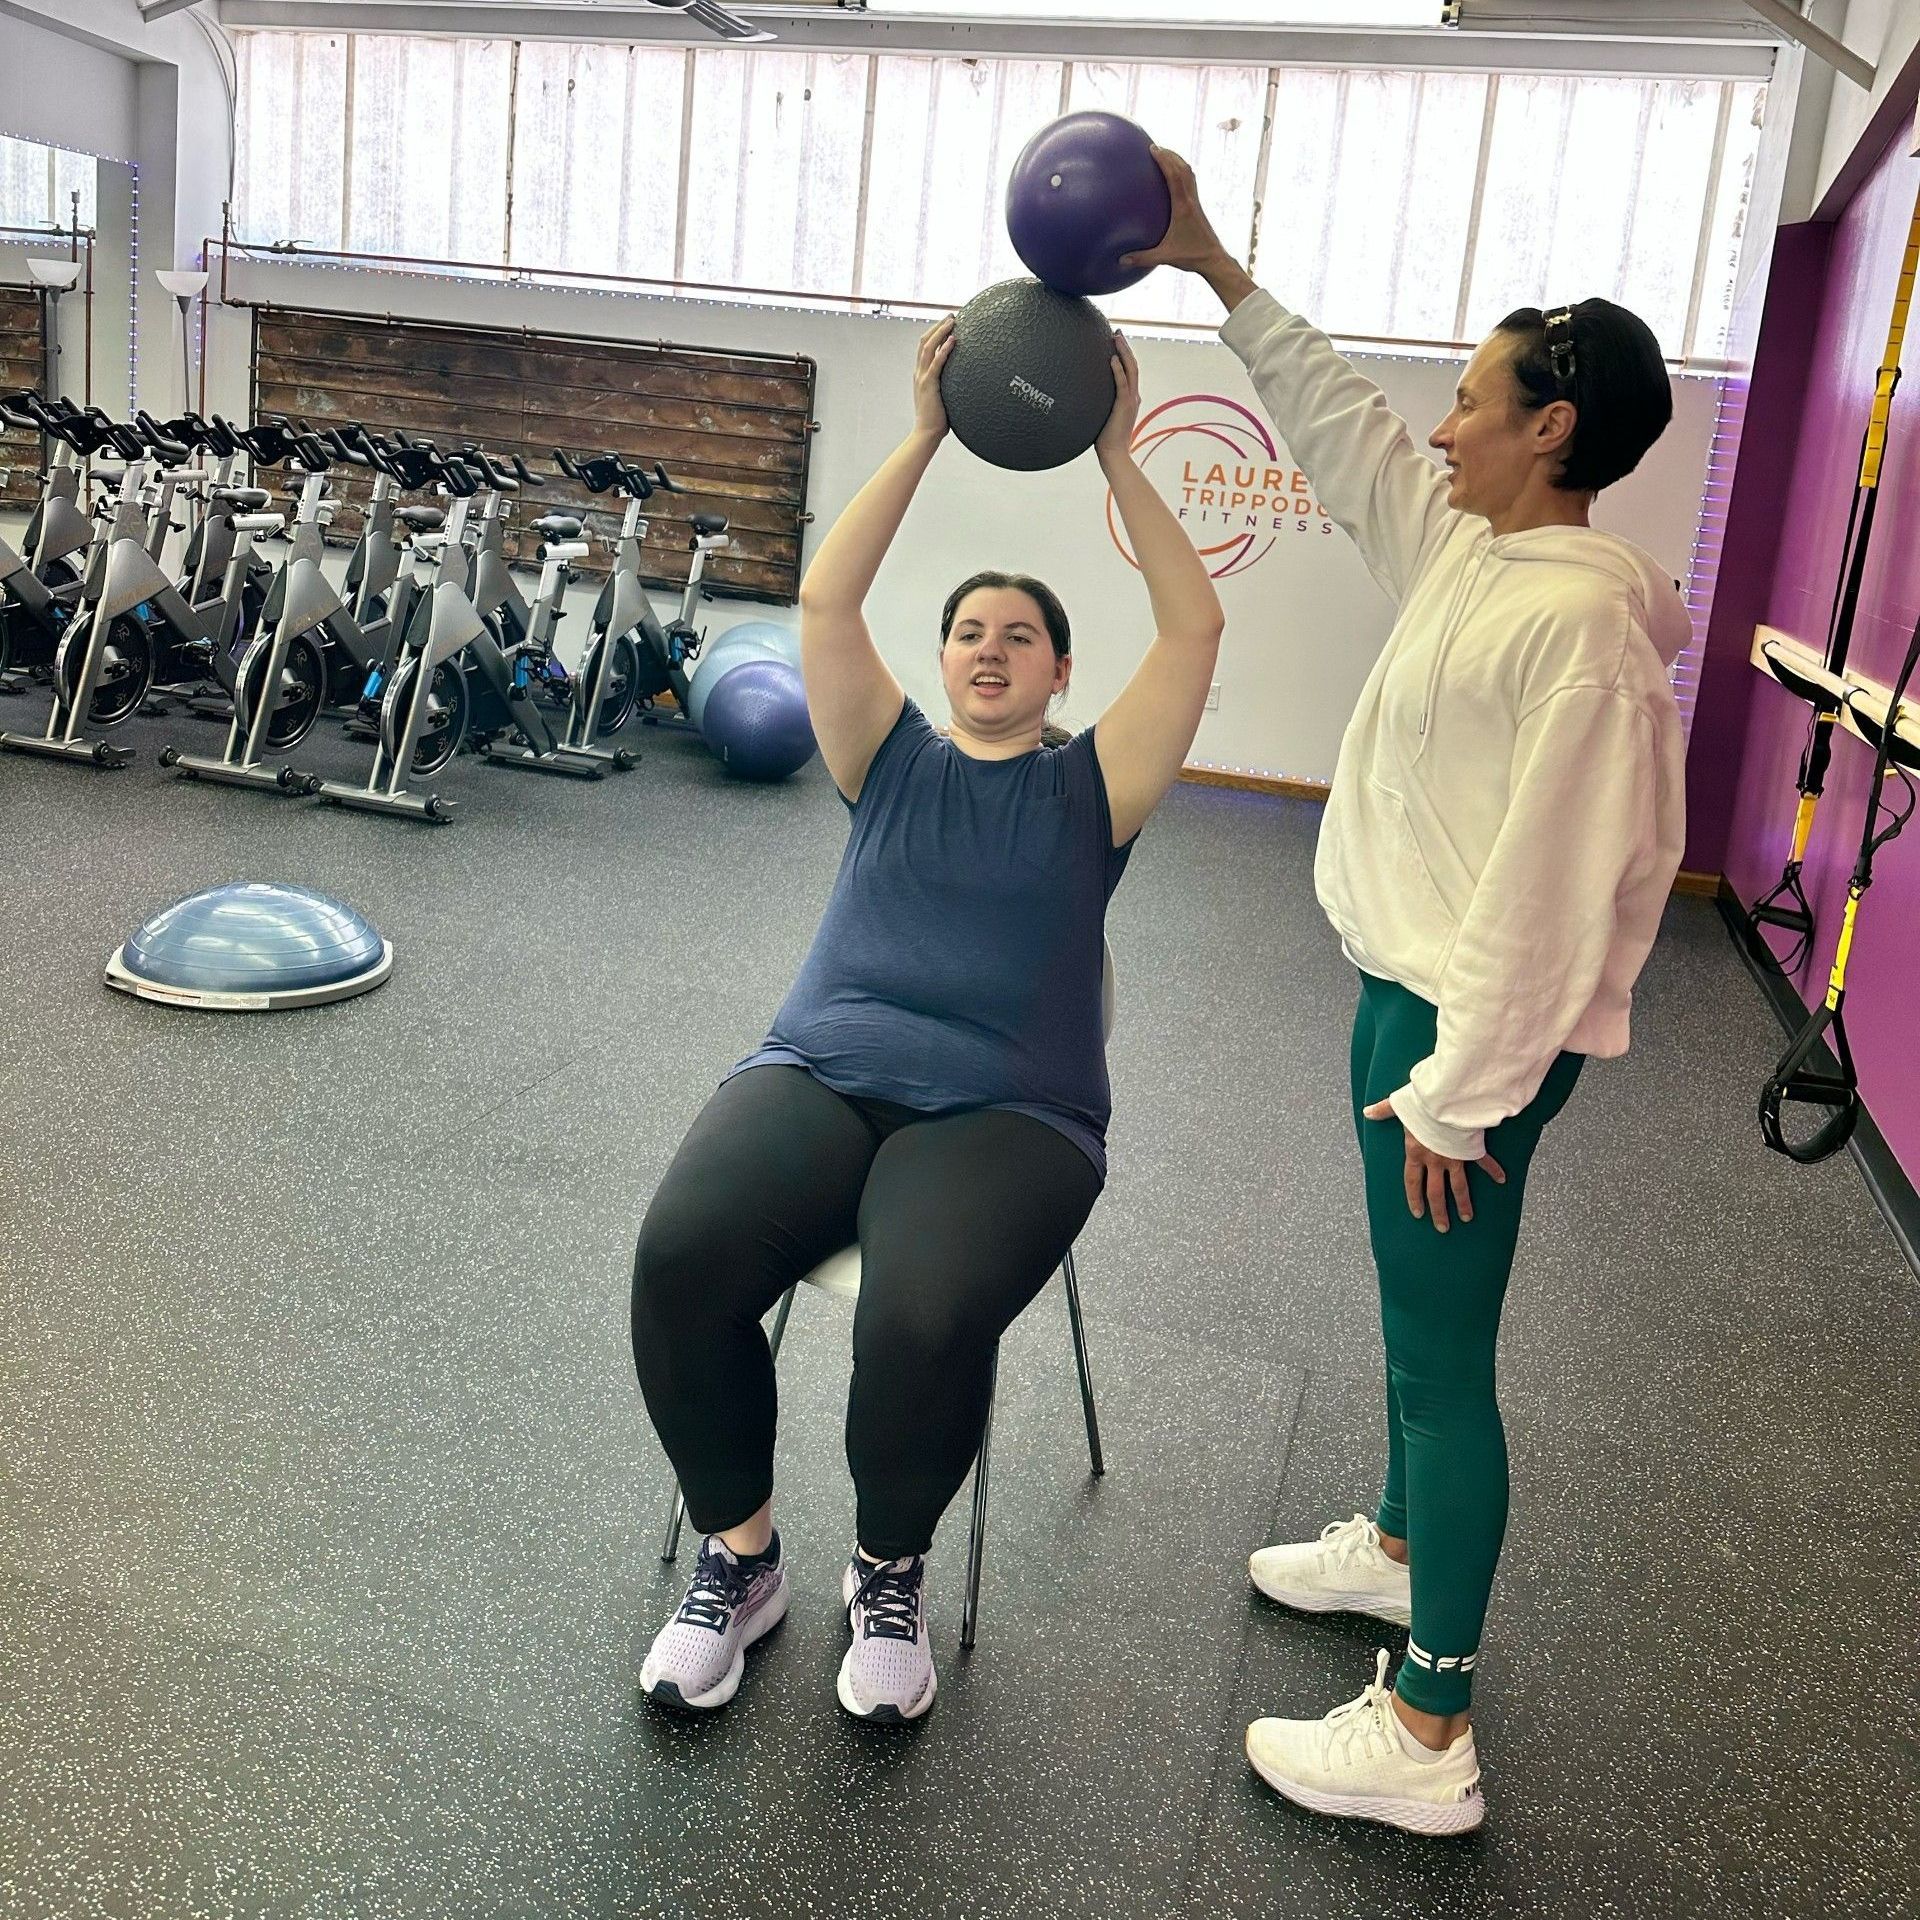 Small Group Training in Gym — Kingston, NY — Lauren Trippodo Fitness